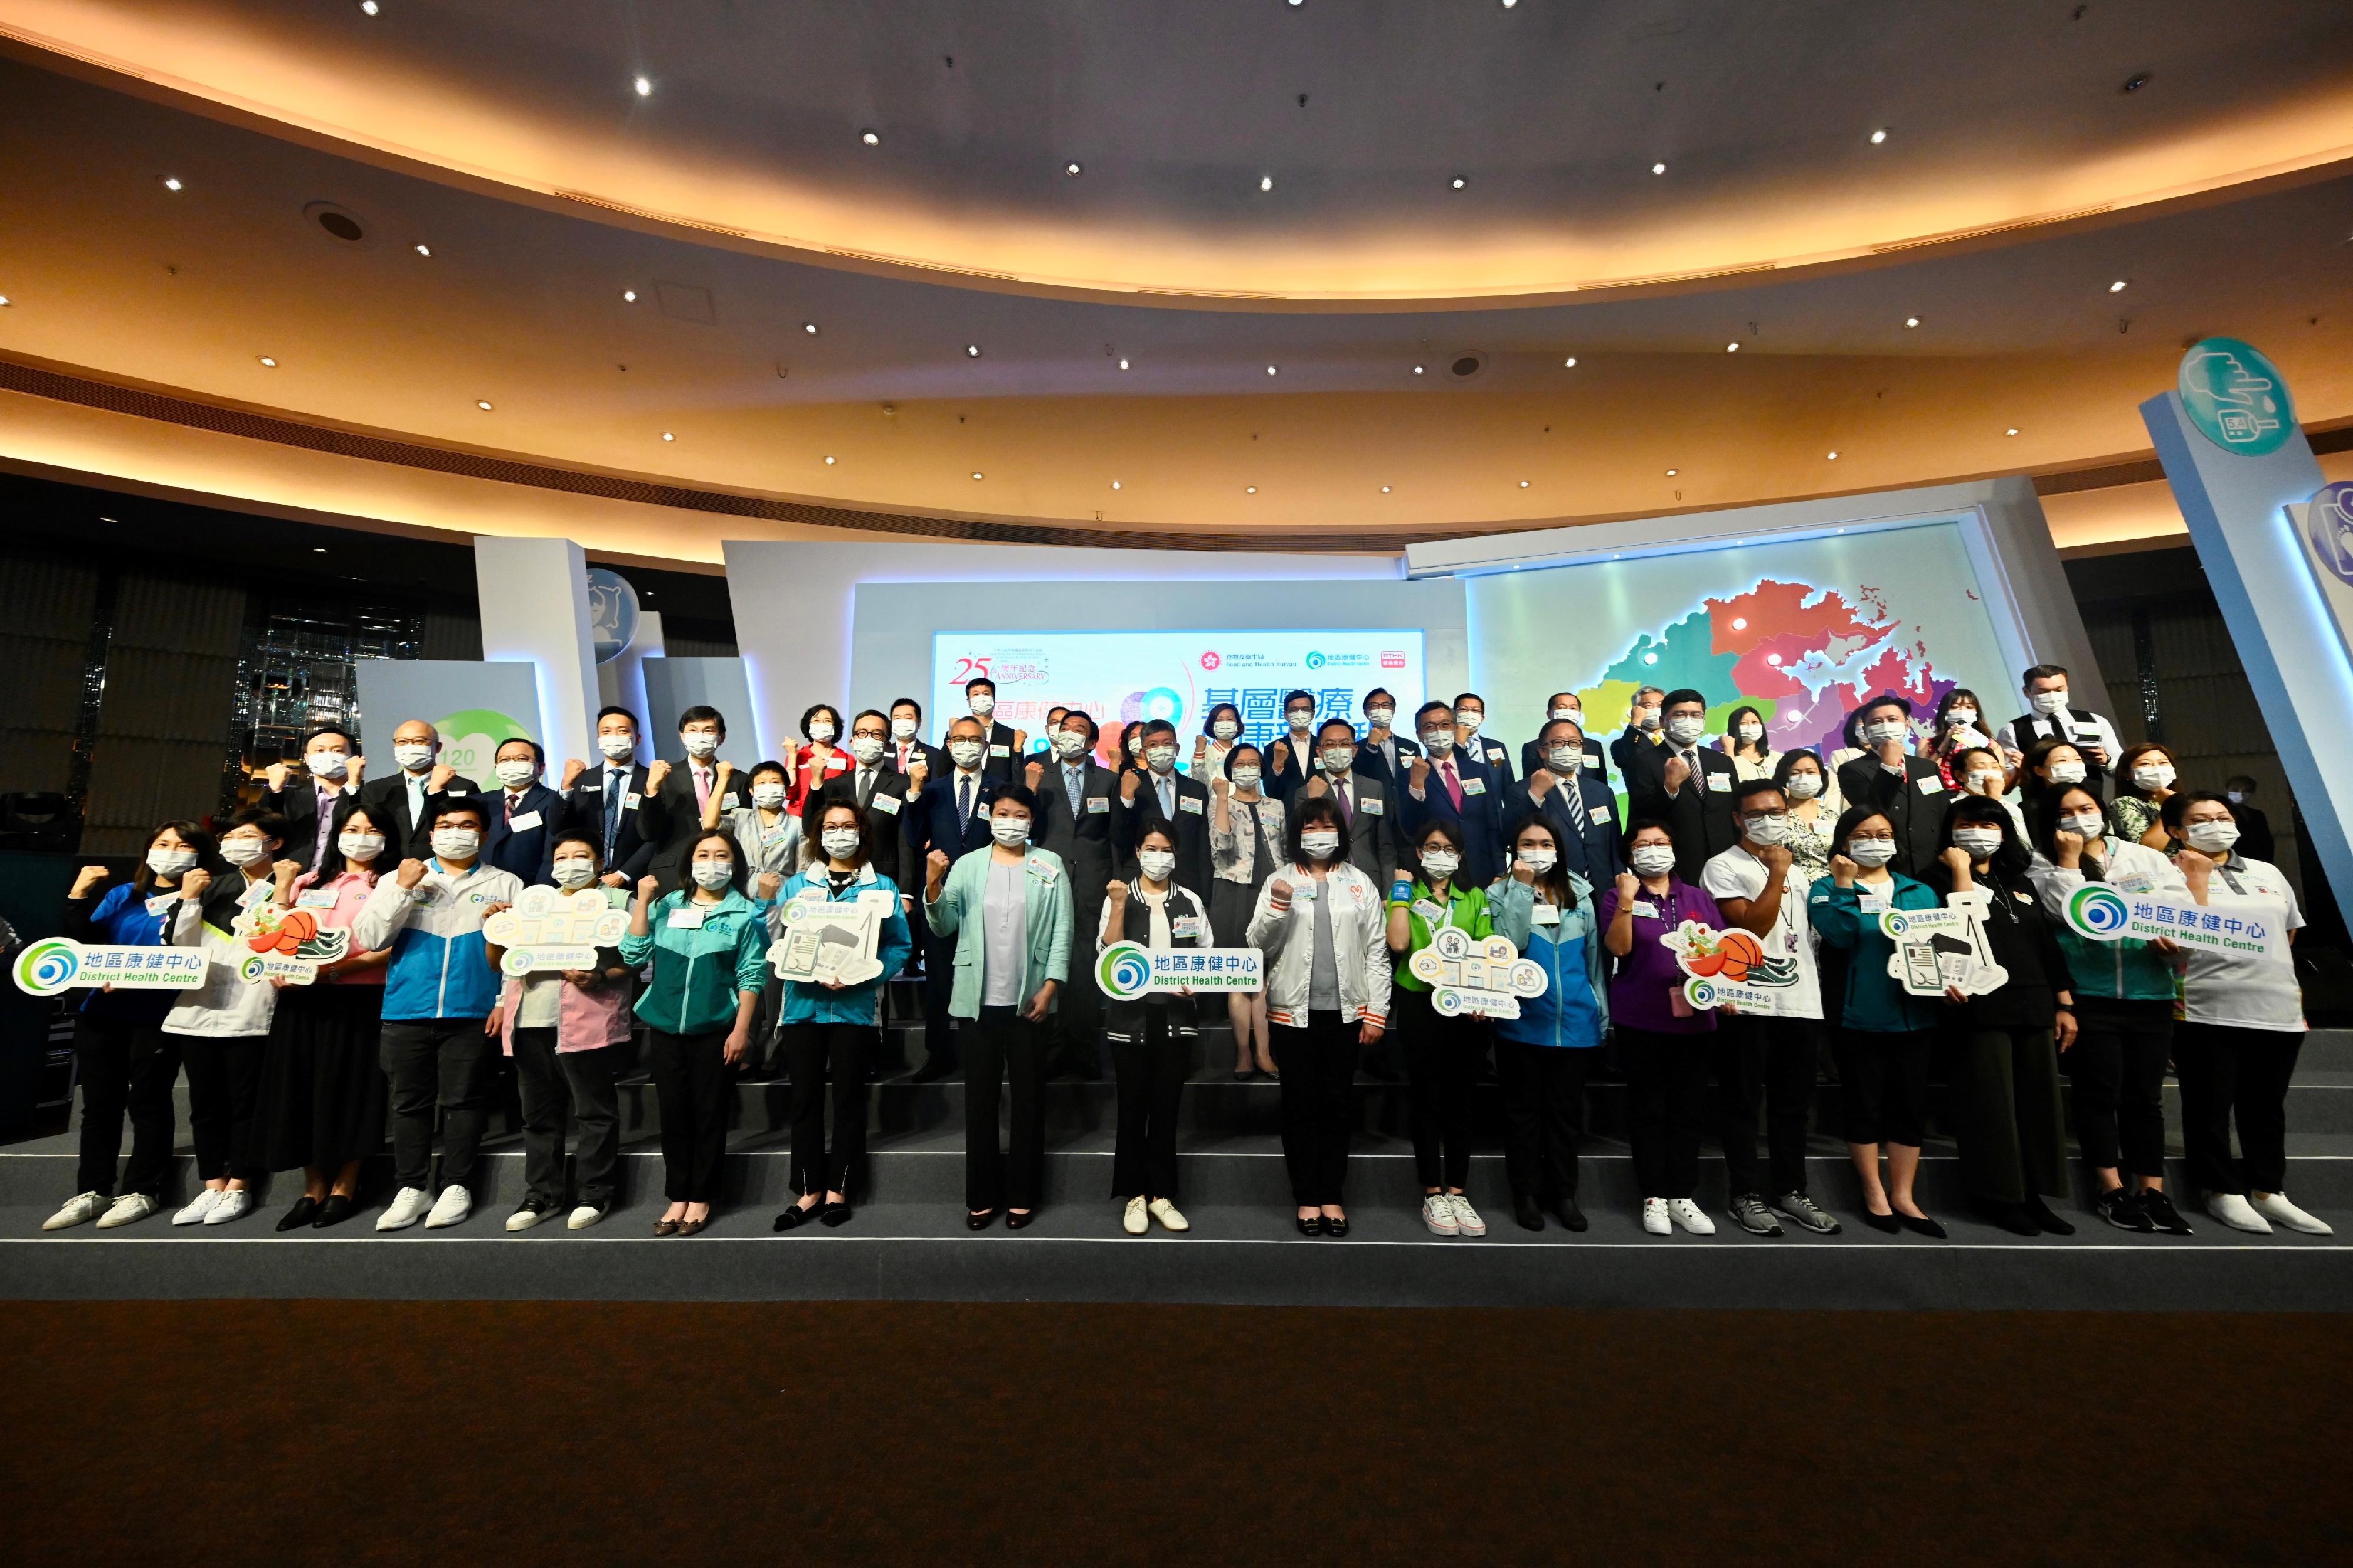 The Secretary for Food and Health, Professor Sophia Chan (second row, tenth right); the Under Secretary for Food and Health, Dr Chui Tak-yi (second row, eighth left); the Permanent Secretary for Food and Health (Health), Mr Thomas Chan (second row, tenth left); the Director of Health, Dr Ronald Lam (second row, ninth right); and the Chairman of the Hospital Authority, Mr Henry Fan (second row, ninth left); together with members of the Steering Committee on Primary Healthcare Development as well as operators and representatives of various District Health Centres/District Health Centre Expresses shout a slogan at the "District Health Centre – New Journey in Primary Healthcare" Ceremony today (June 15) to show their determination in developing primary healthcare.